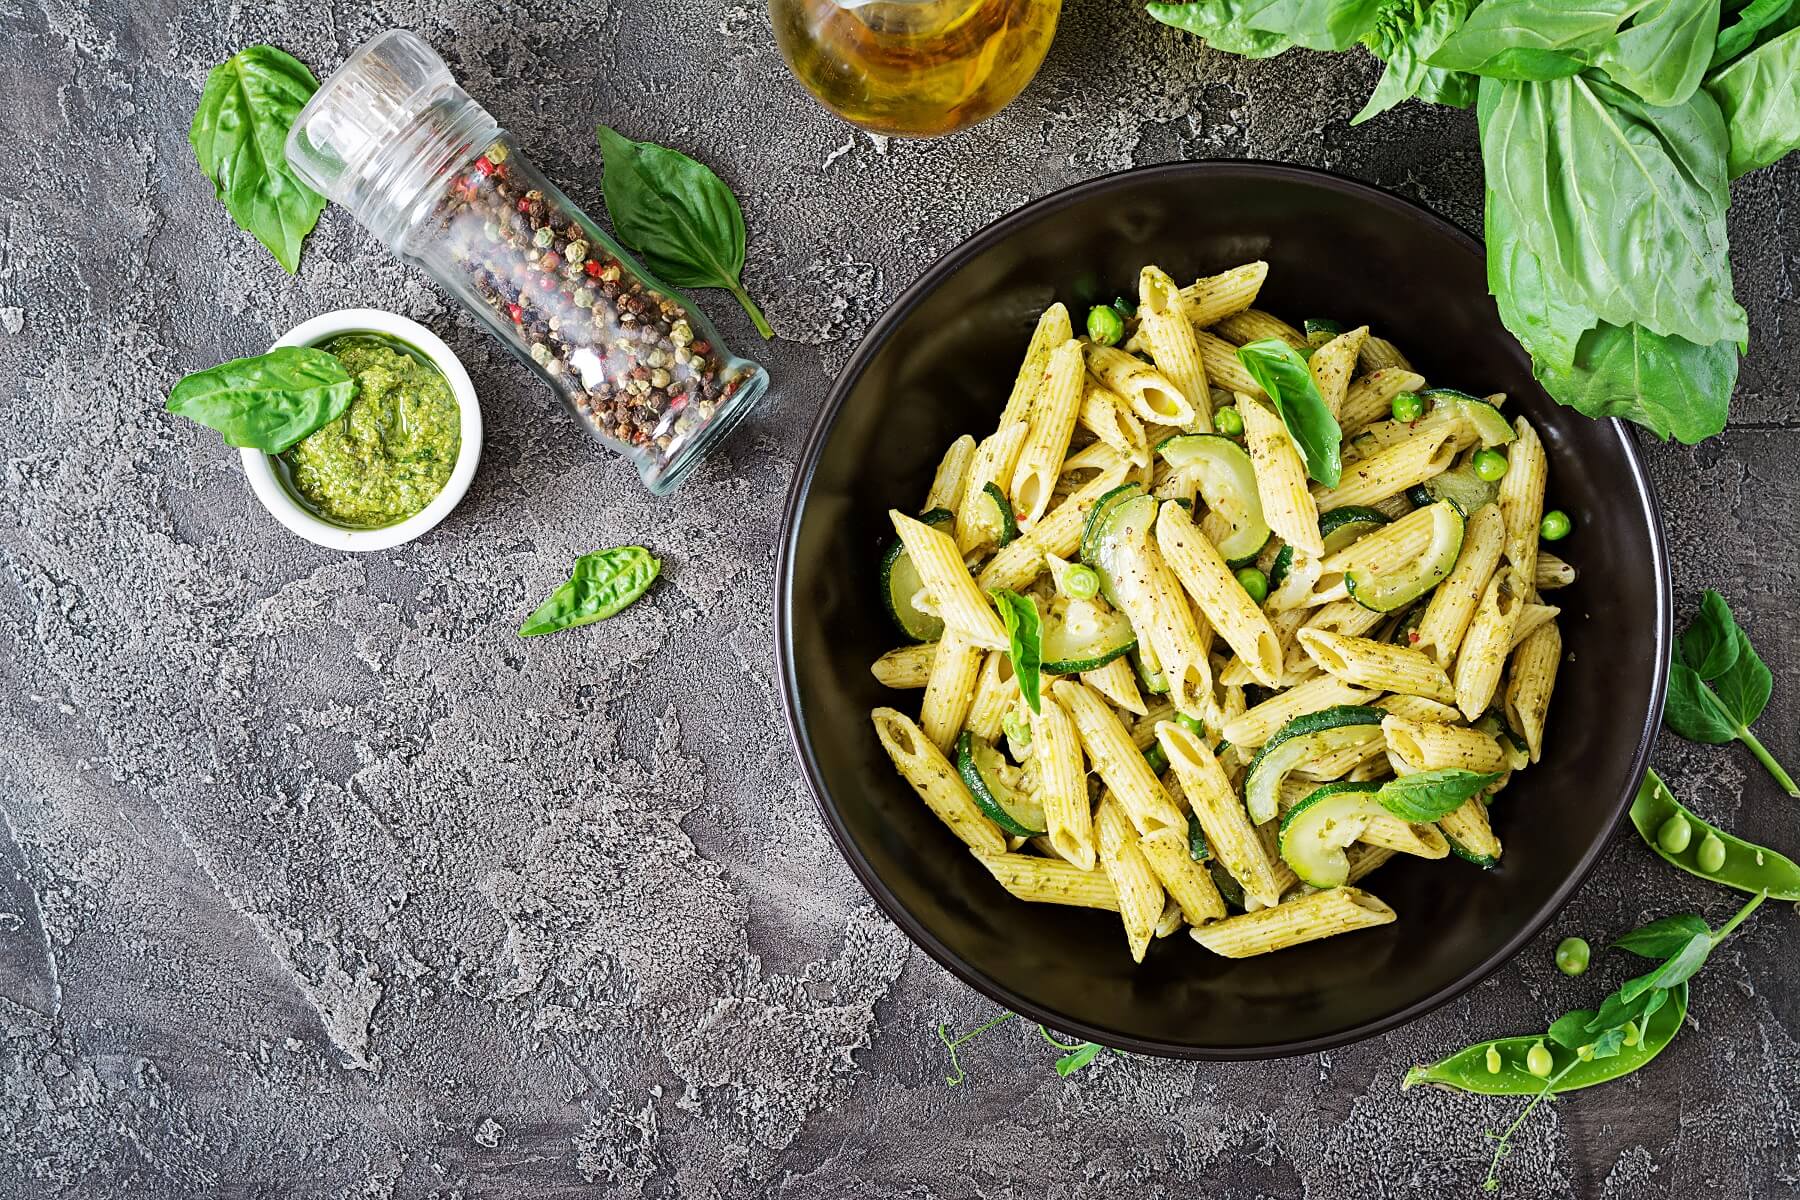 Is Pesto Pasta Good For Weight Loss